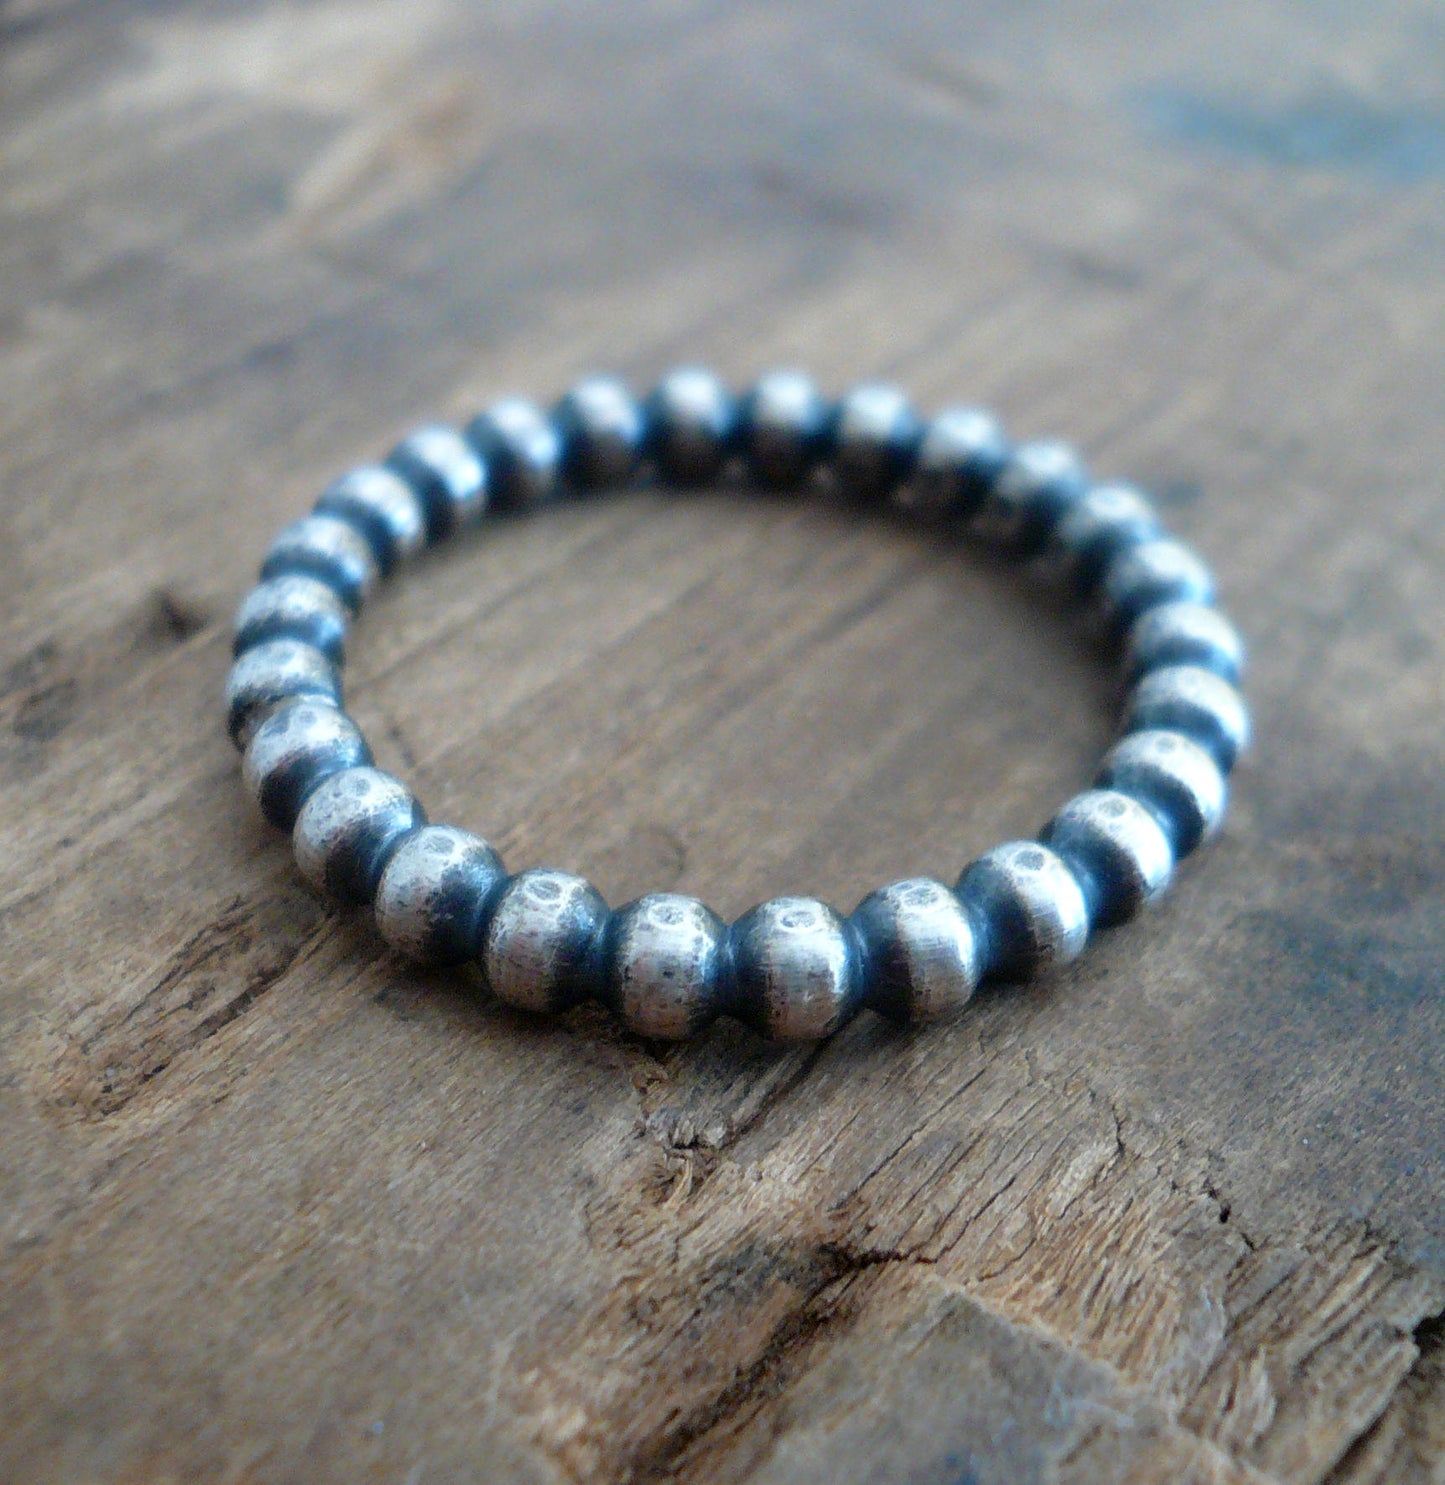 Olio Ring - Sterling Silver Beaded Stacking Ring. Hand made by jNic Designs